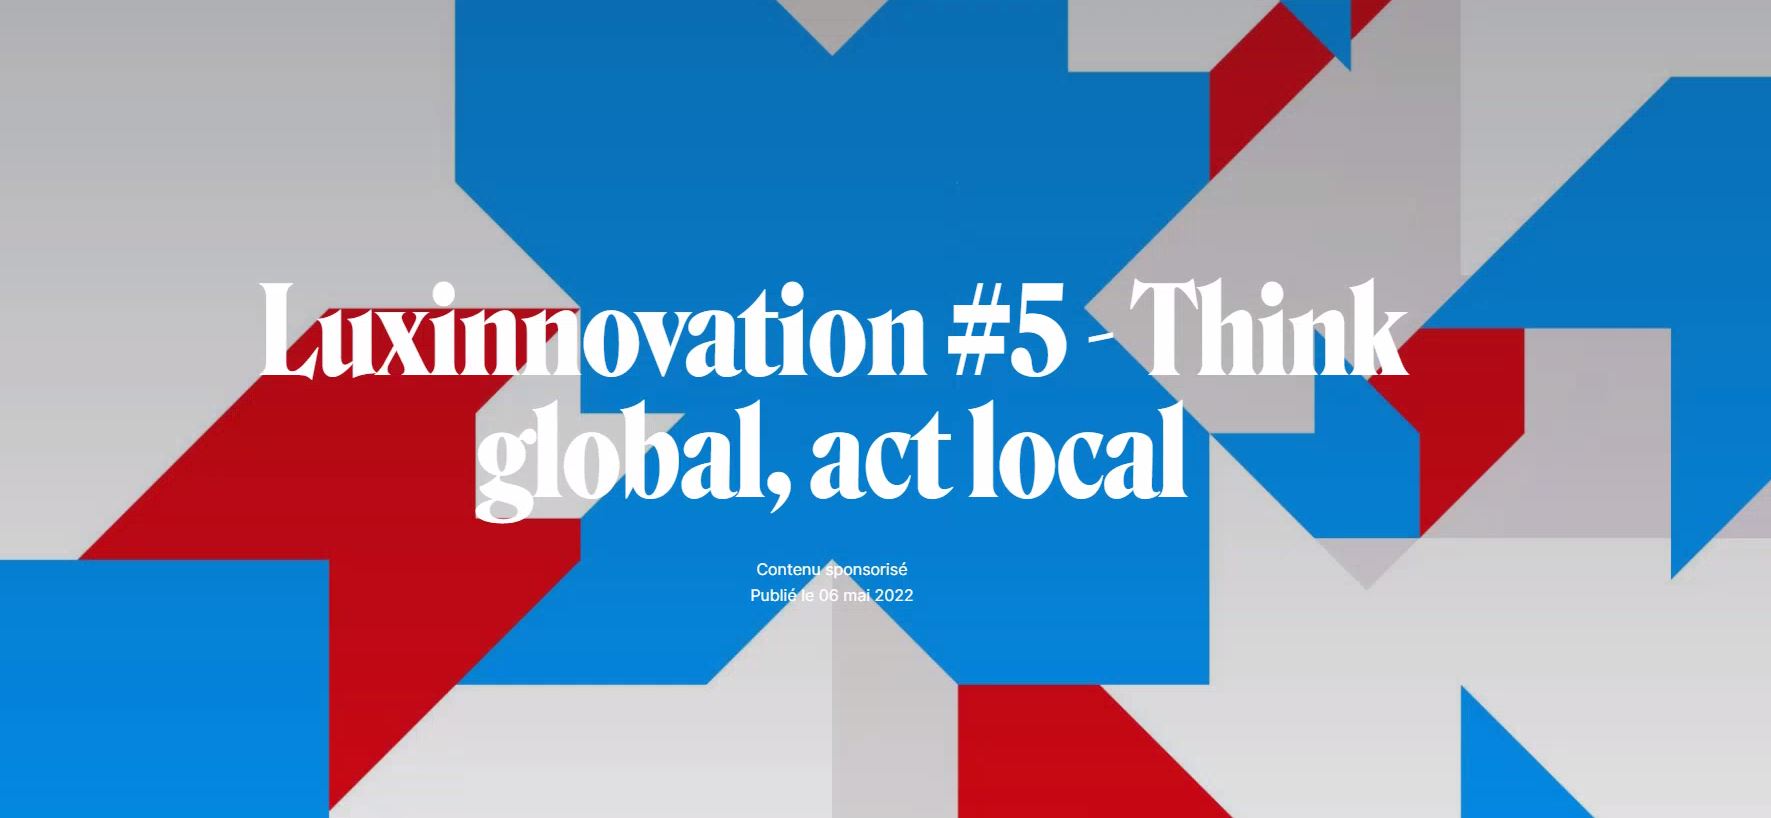 Podcast Luxinnovation #5 - Think global, act local